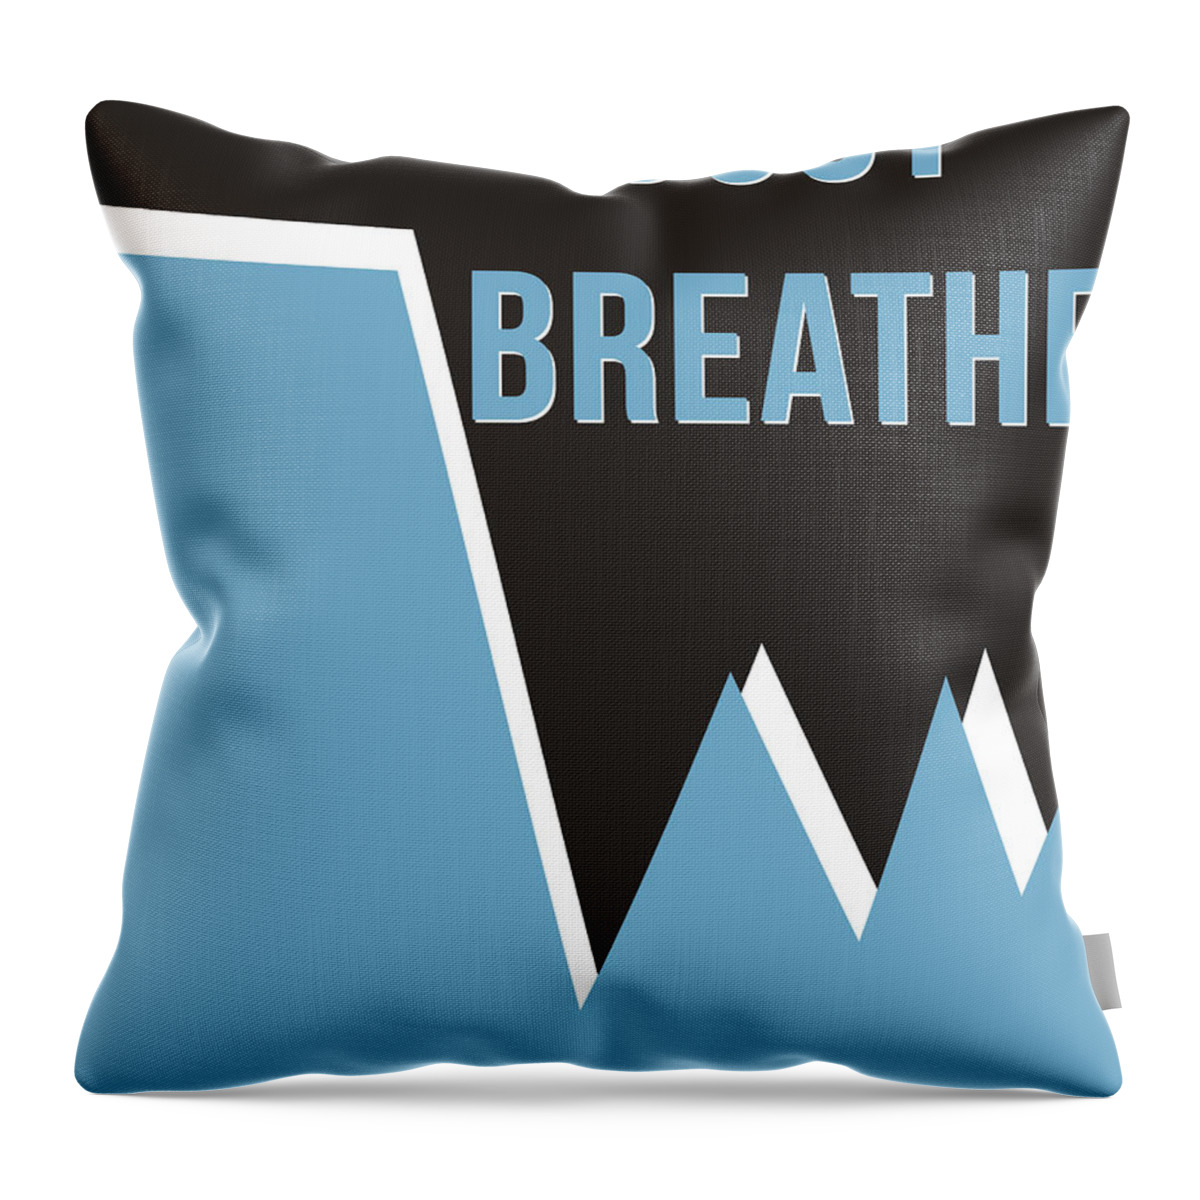 Just Breathe Throw Pillow featuring the digital art Just Breathe by Dan Sproul